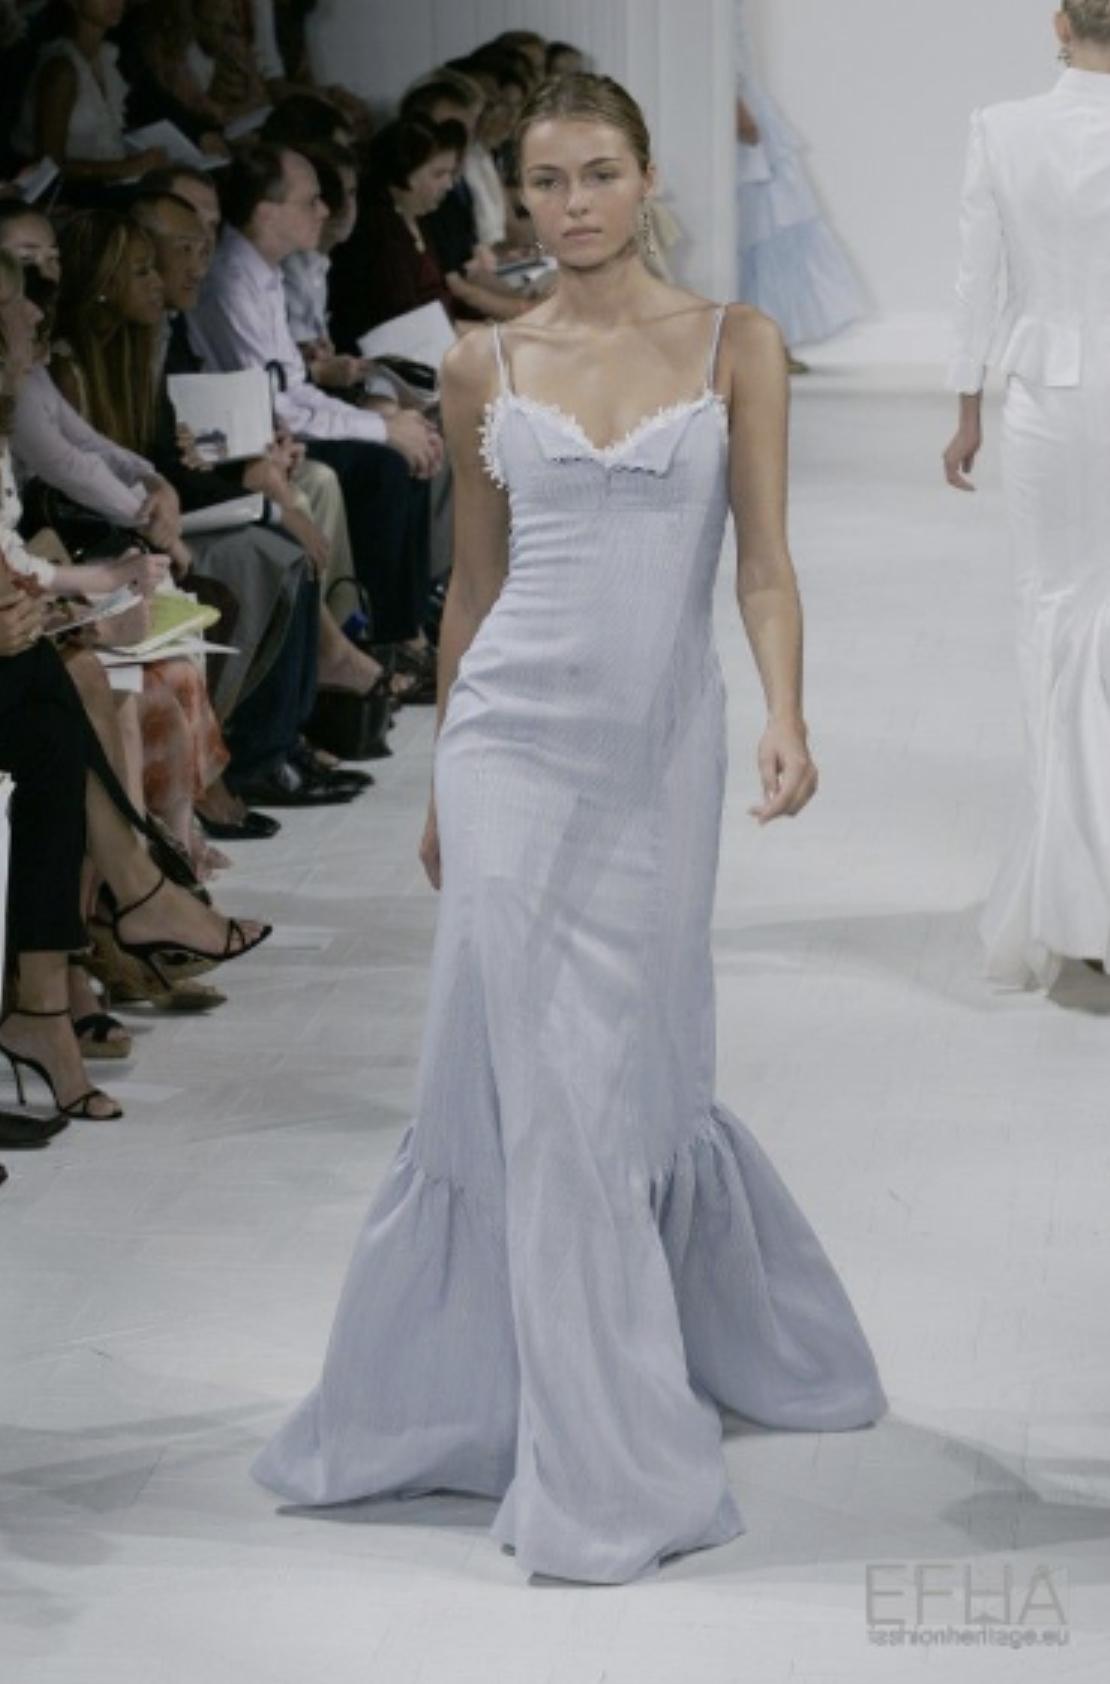 S/S 2006 Ralph Lauren pinstriped blue and white lace trim gown. Sleeveless fitted mermaid style gown with blue and white pinstriped pattern throughout, and full skirt with gathering at mid-thigh. Lace trim with white broderie anglaise and cotton